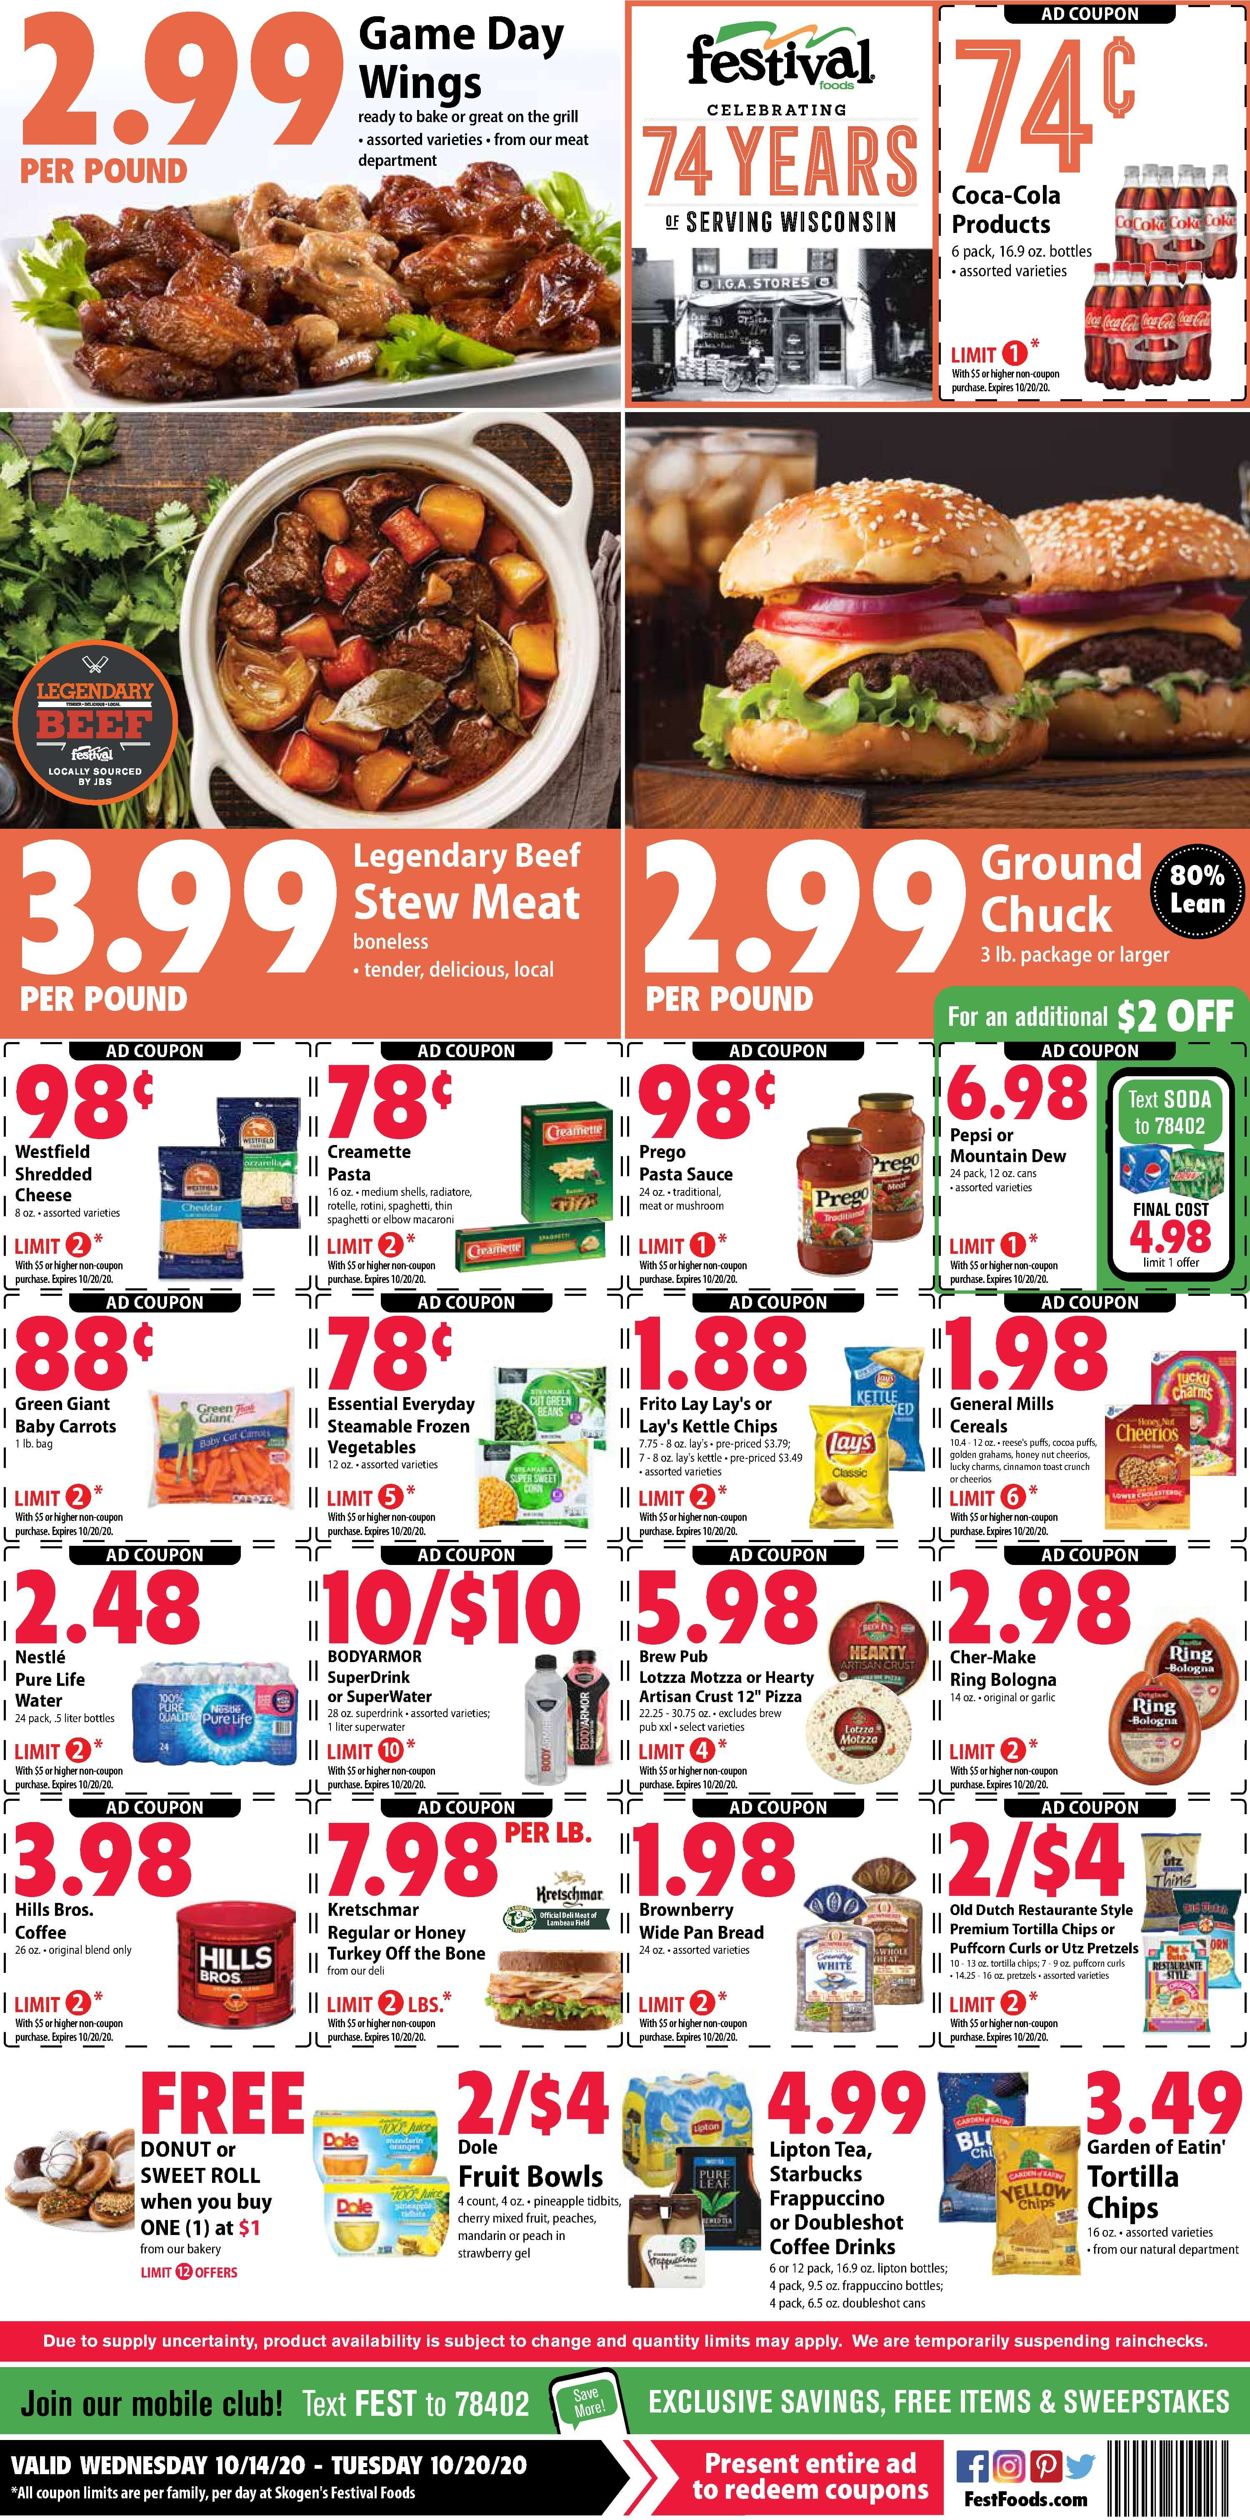 Festival Foods Current weekly ad 10/14 - 10/27/2020 - frequent-ads.com